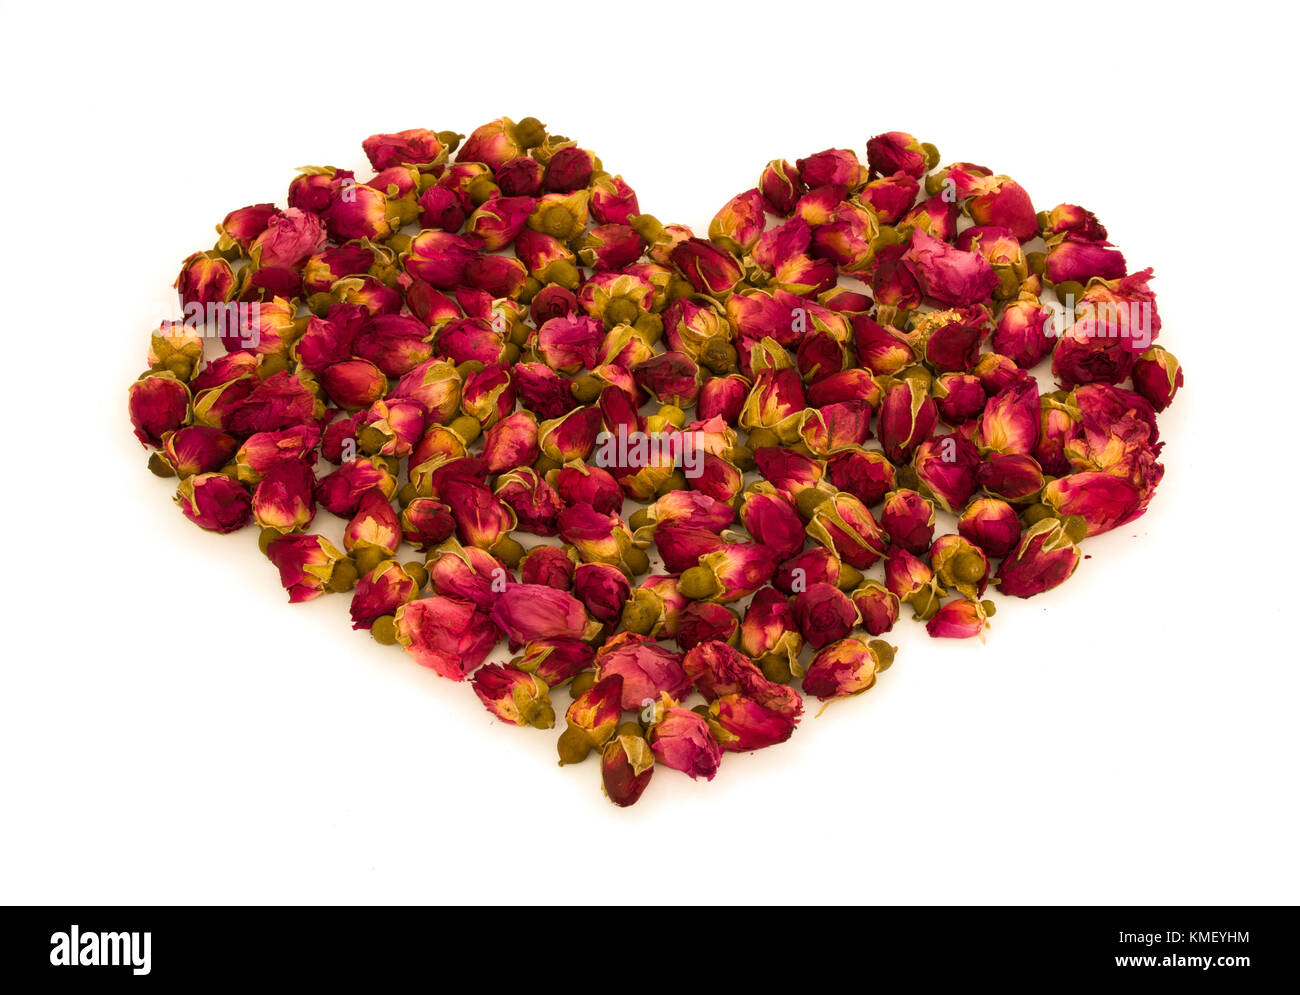 Heart shape made of rosebuds flowers isolated on white background - love symbol concept Stock Photo